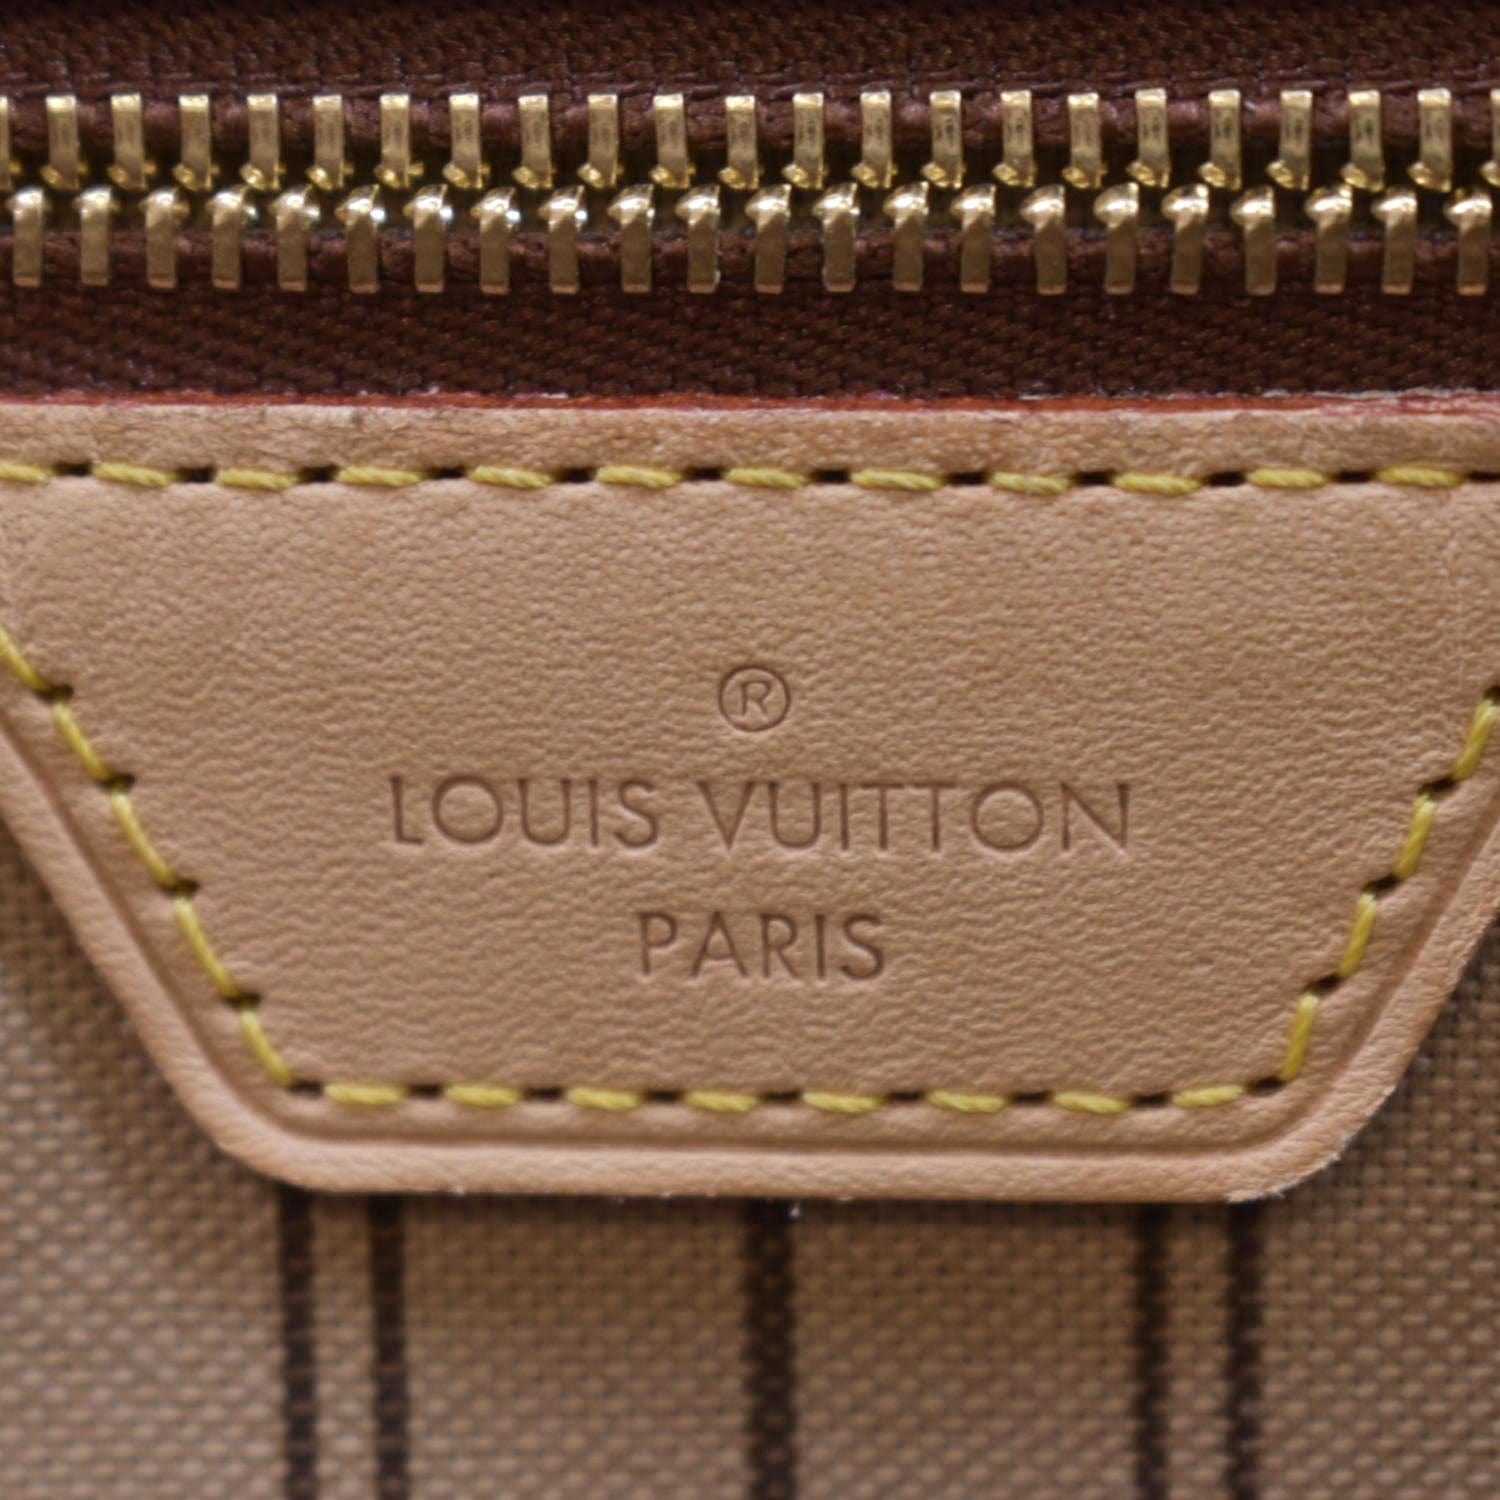 Which bag would you buy for an everyday evening bag? : r/Louisvuitton